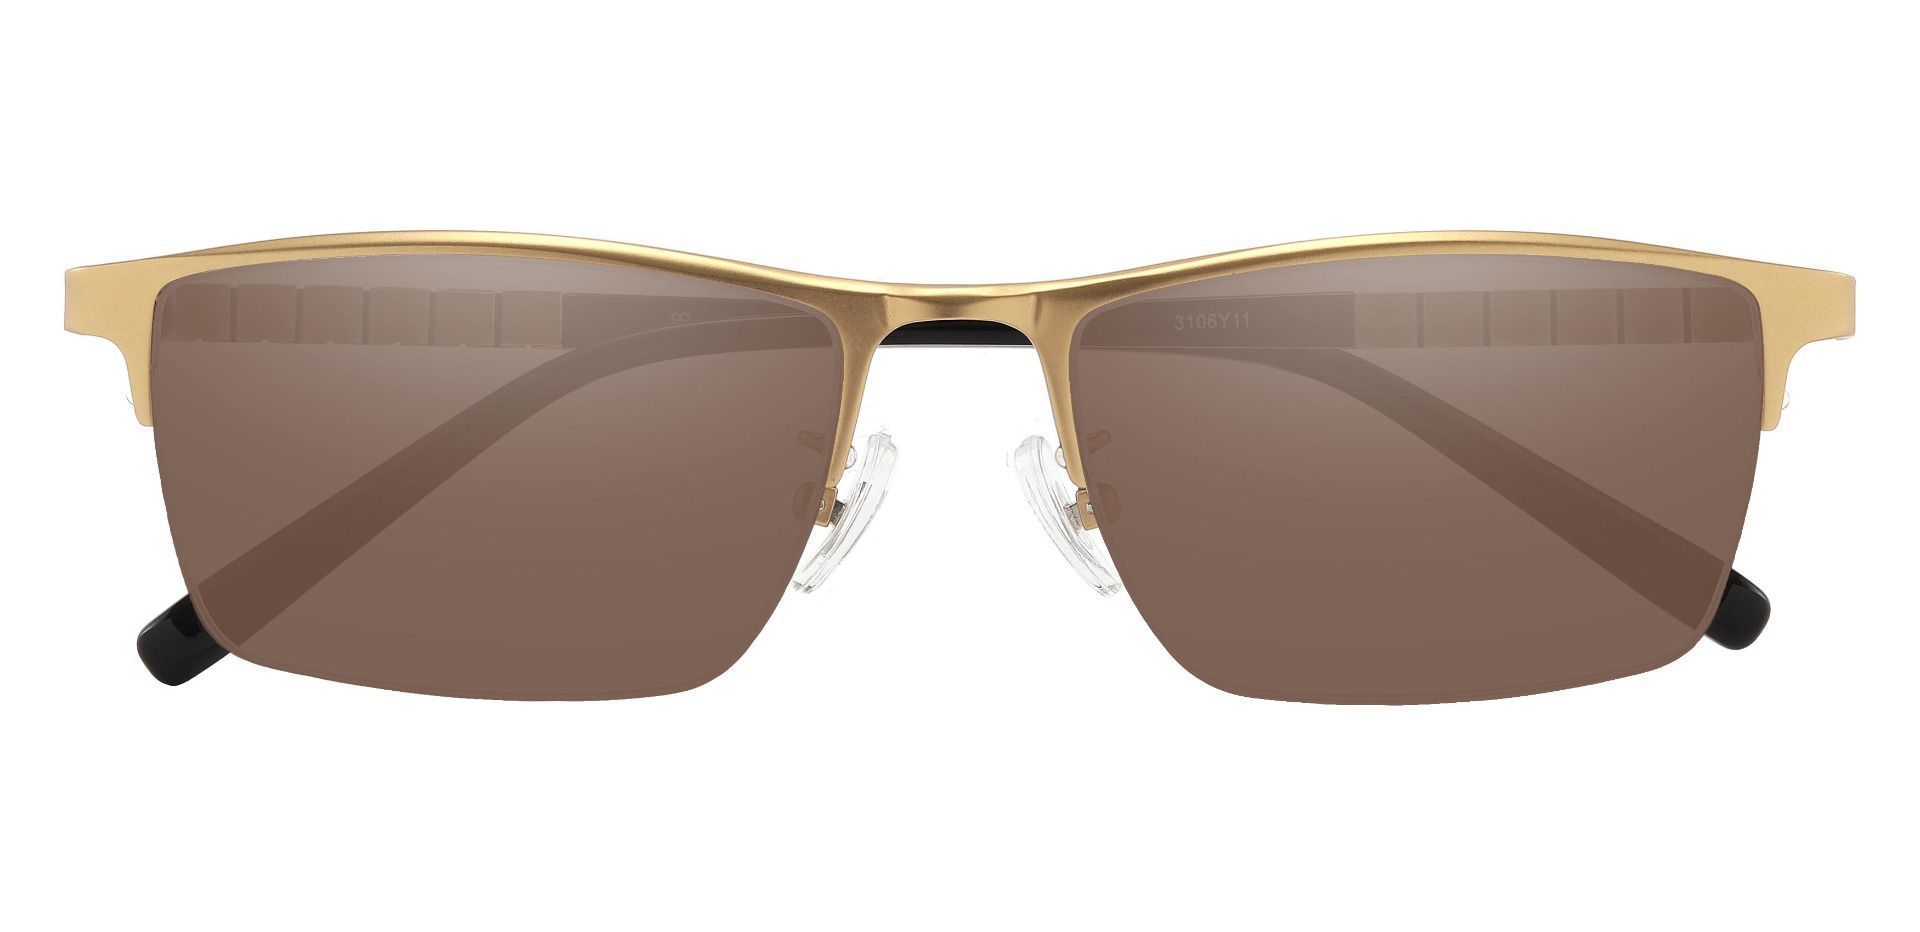 Maine Rectangle Progressive Sunglasses - Gold Frame With Brown Lenses